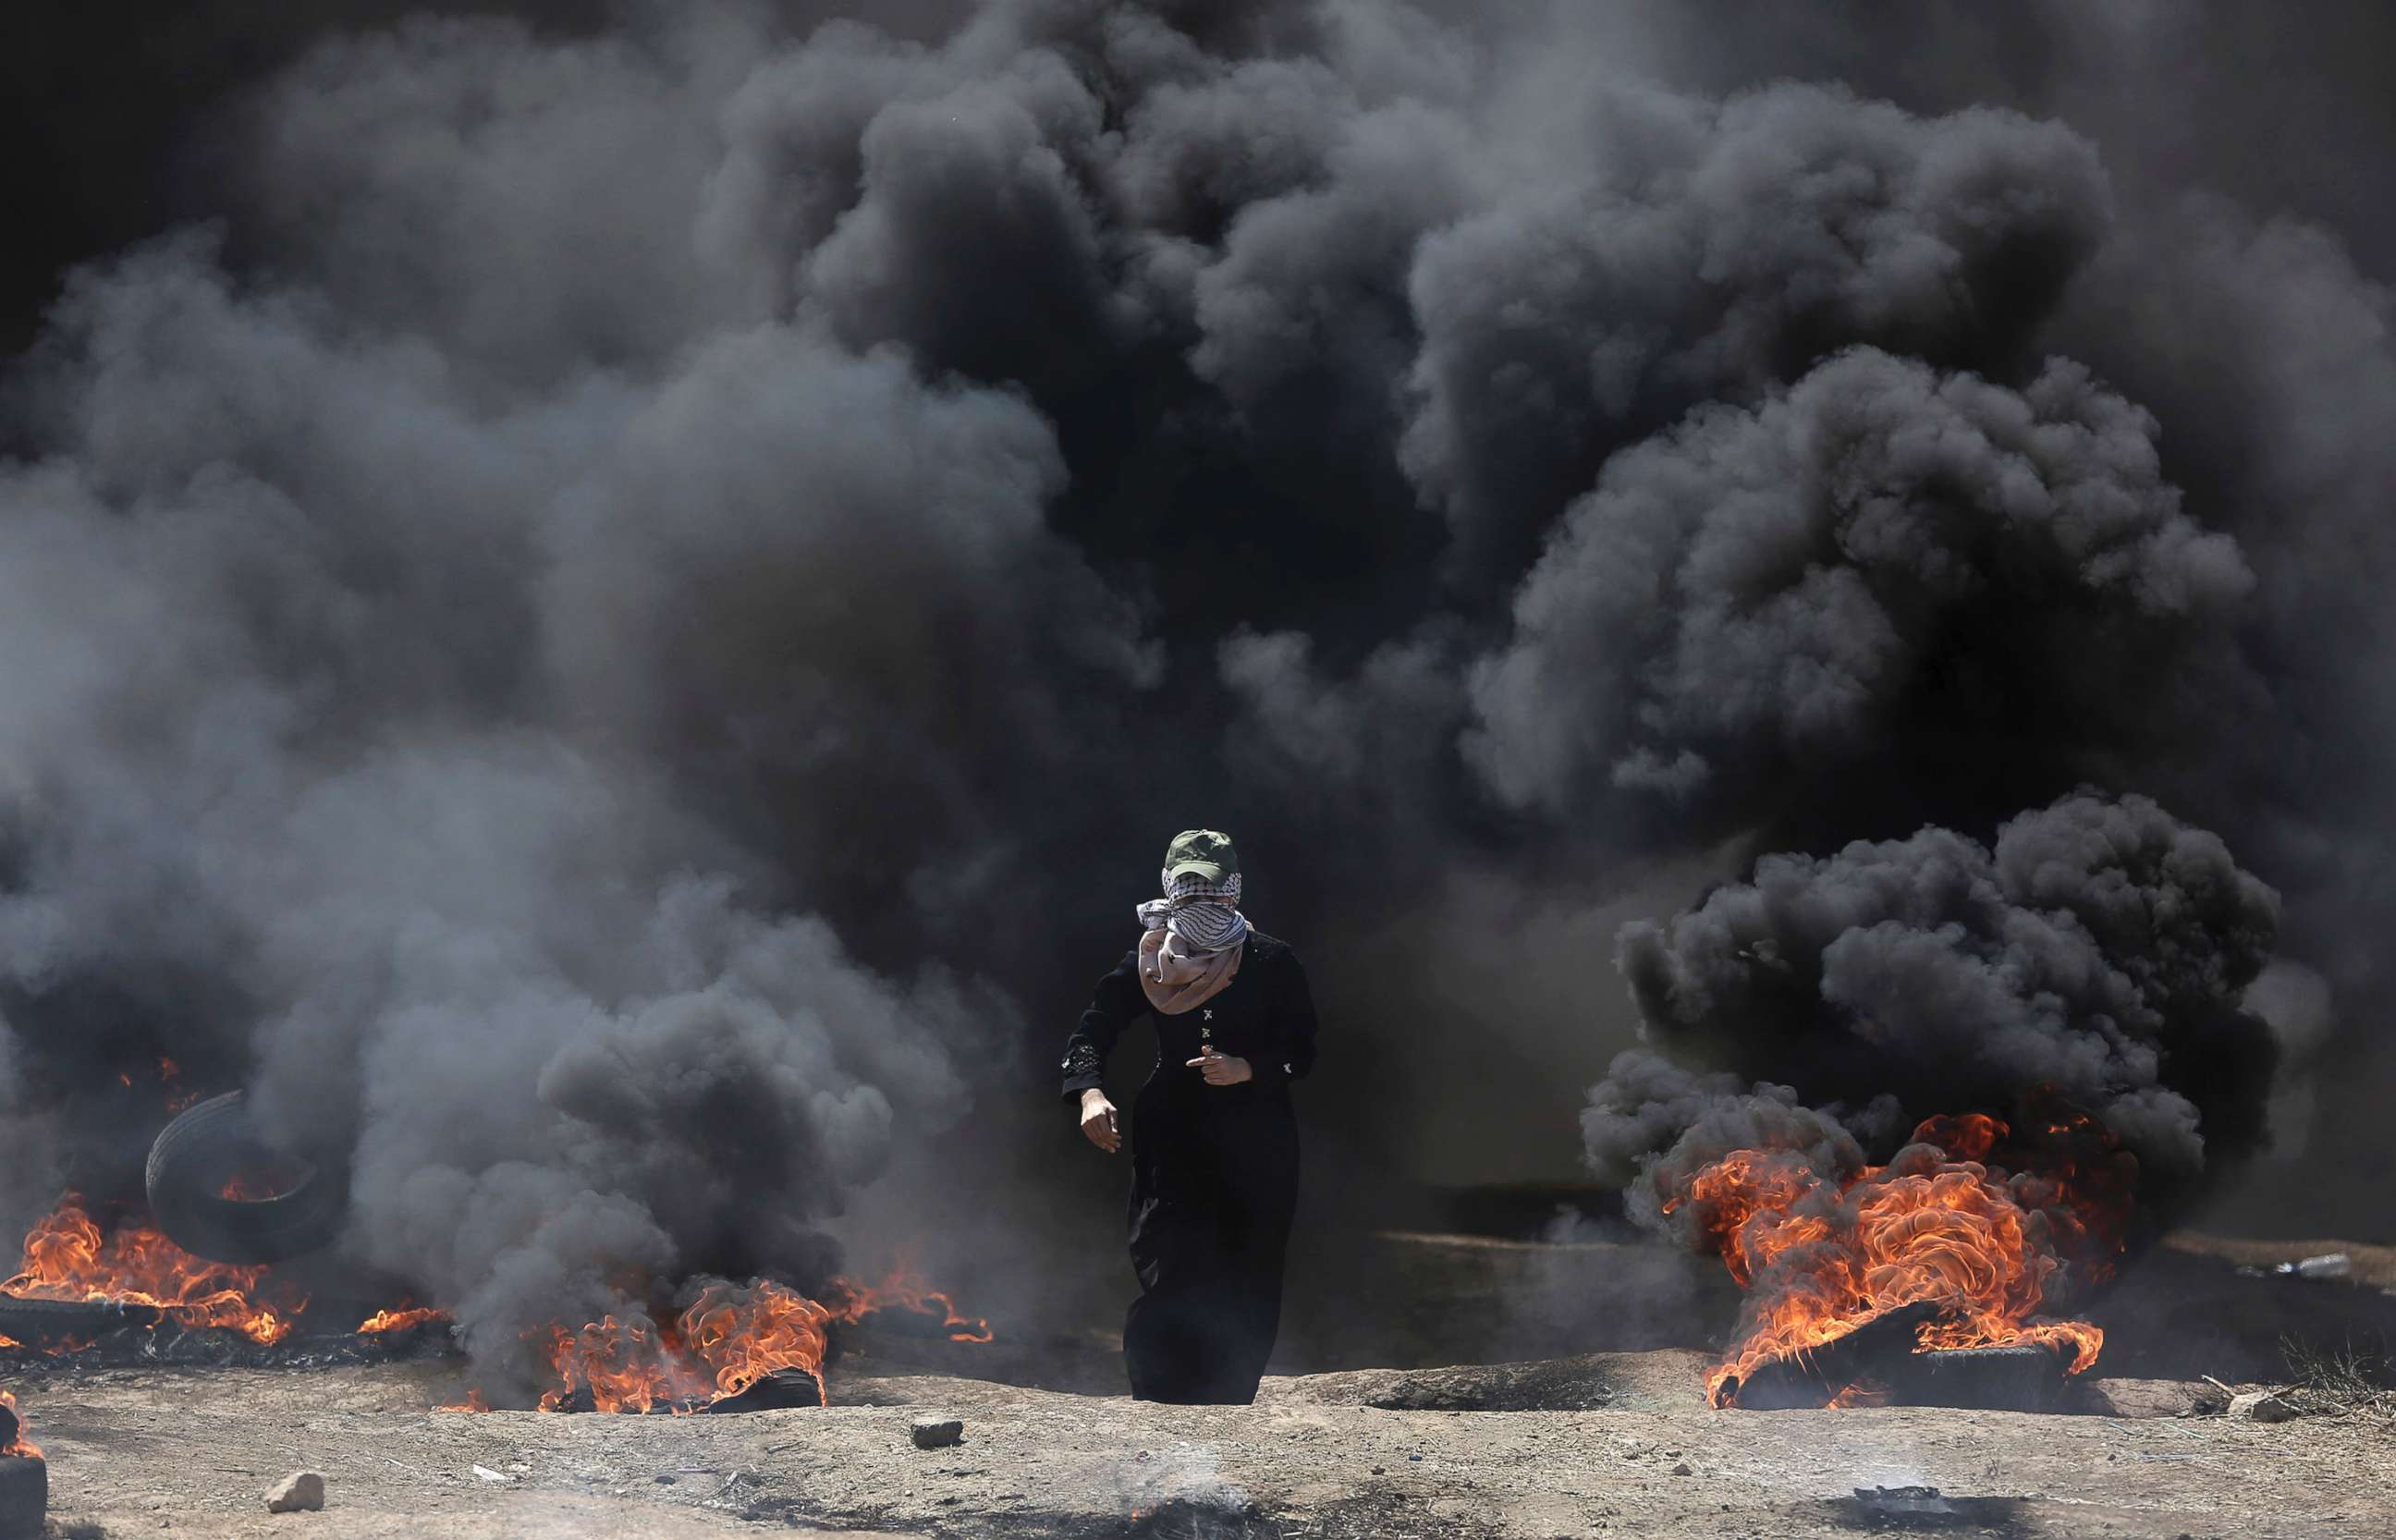 PHOTO: A Palestinian woman walks through black smoke from burning tires during a protest on the Gaza Strip's border with Israel, May 14, 2018.